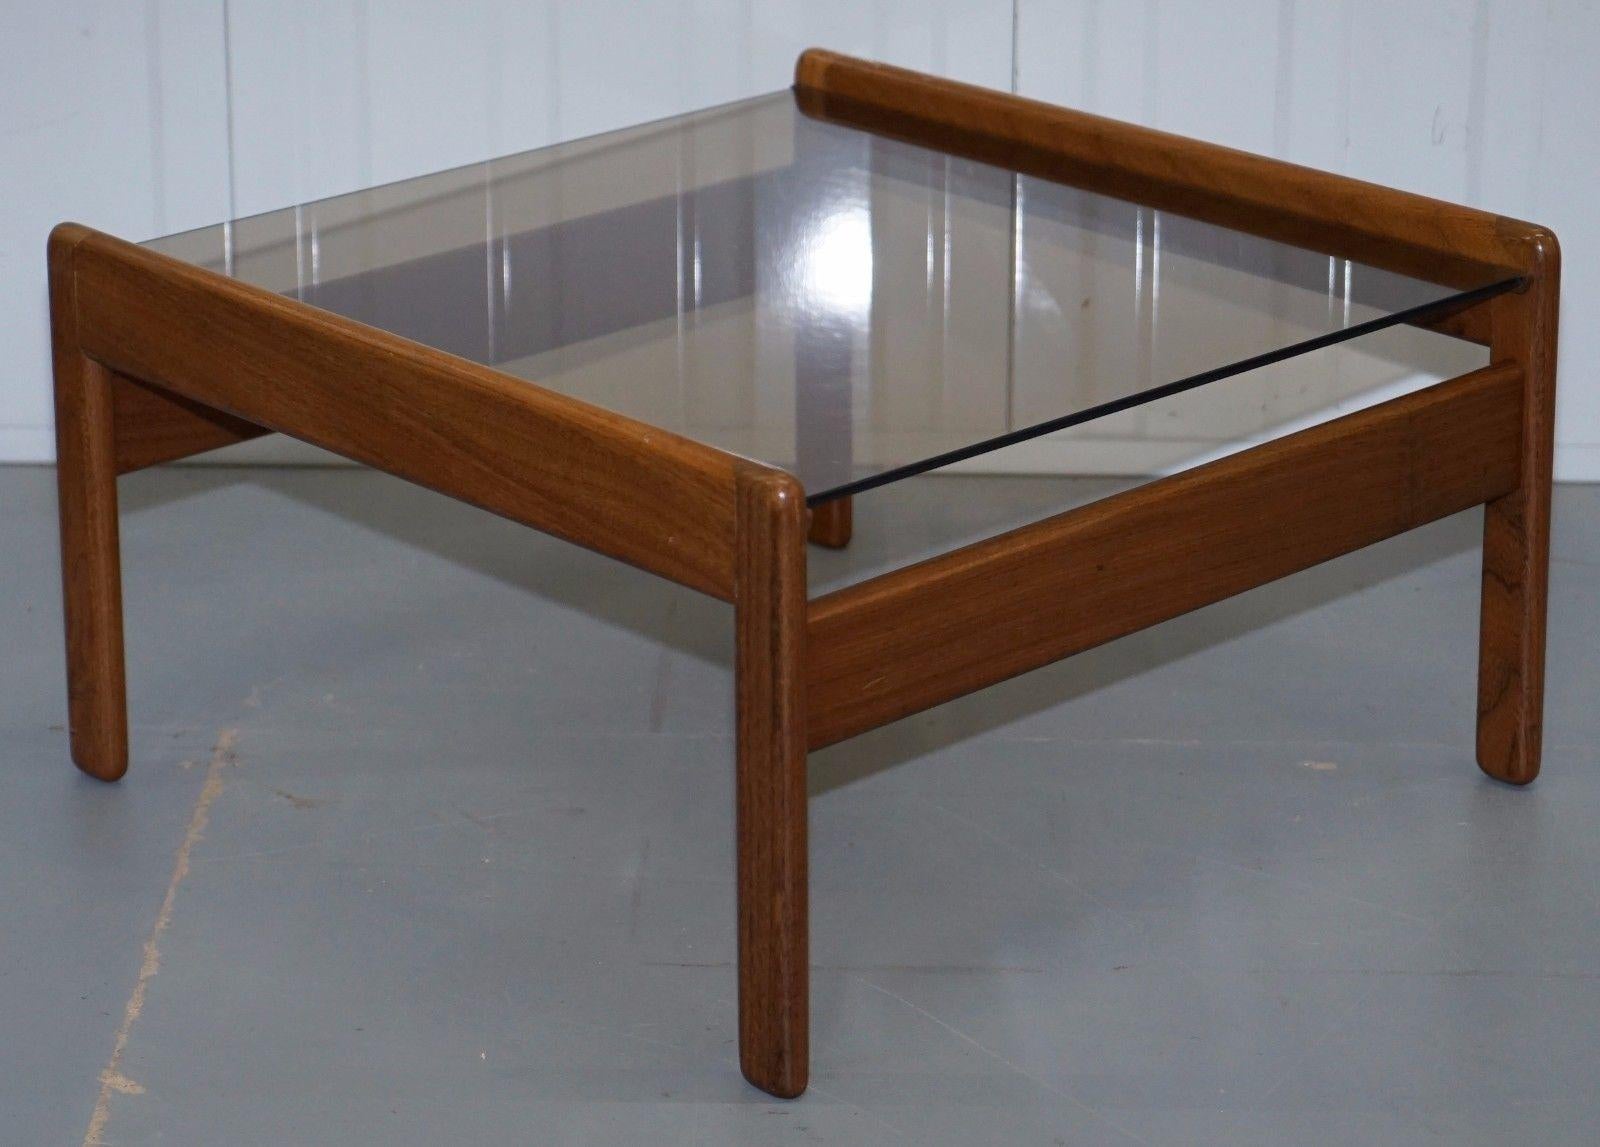 Hand-Crafted Pair of Mid-Century Modern 1960s Danish Teak Side Tables with Glass Tops Lovely